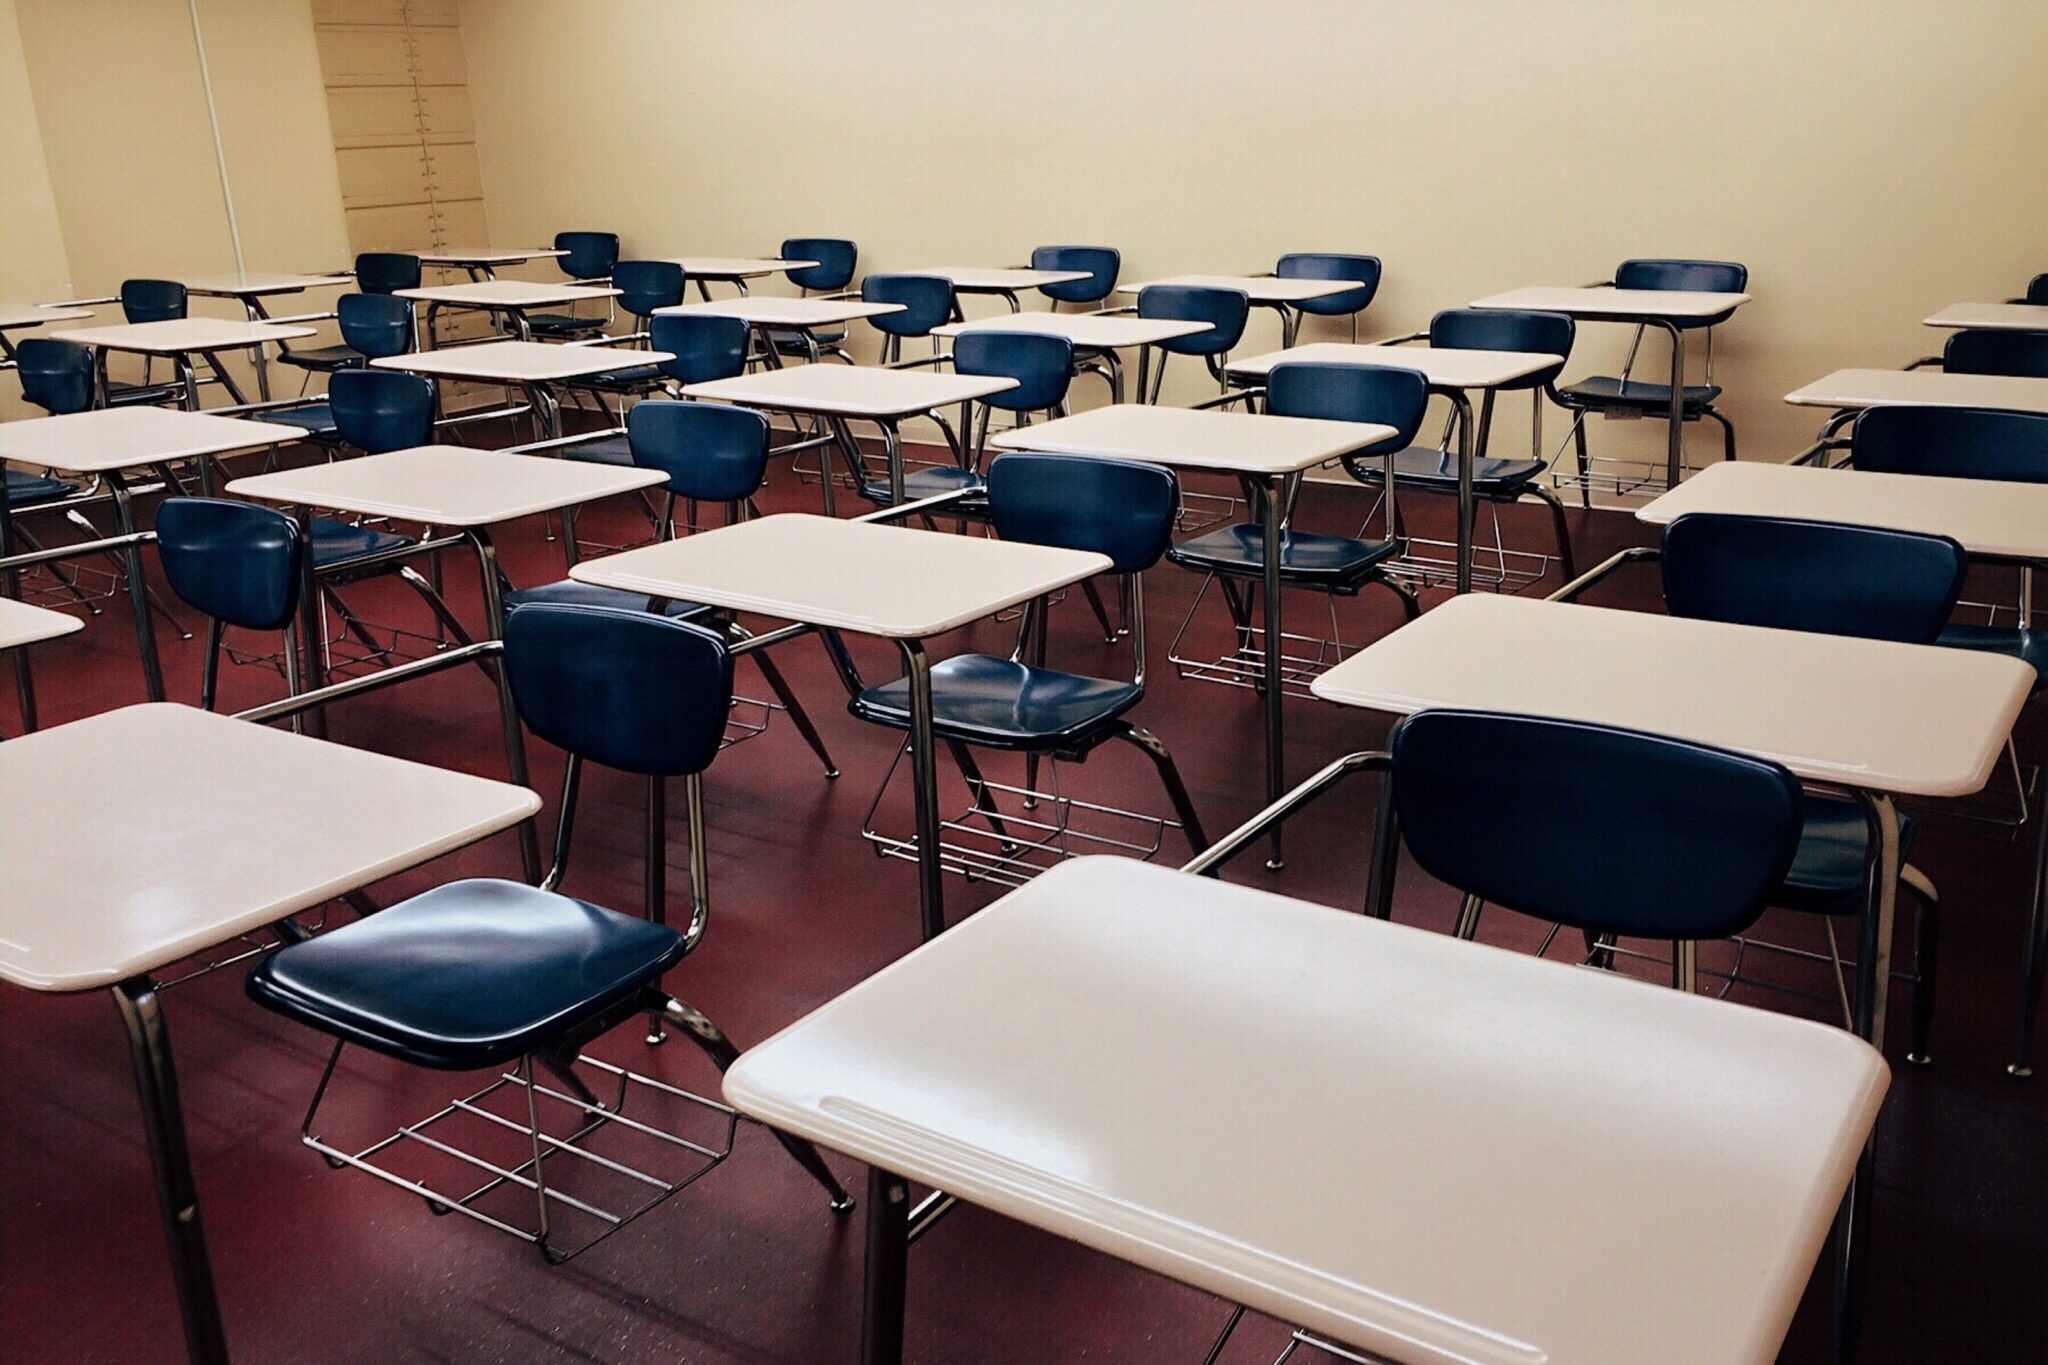 “Empty college classroom chairs and desks”